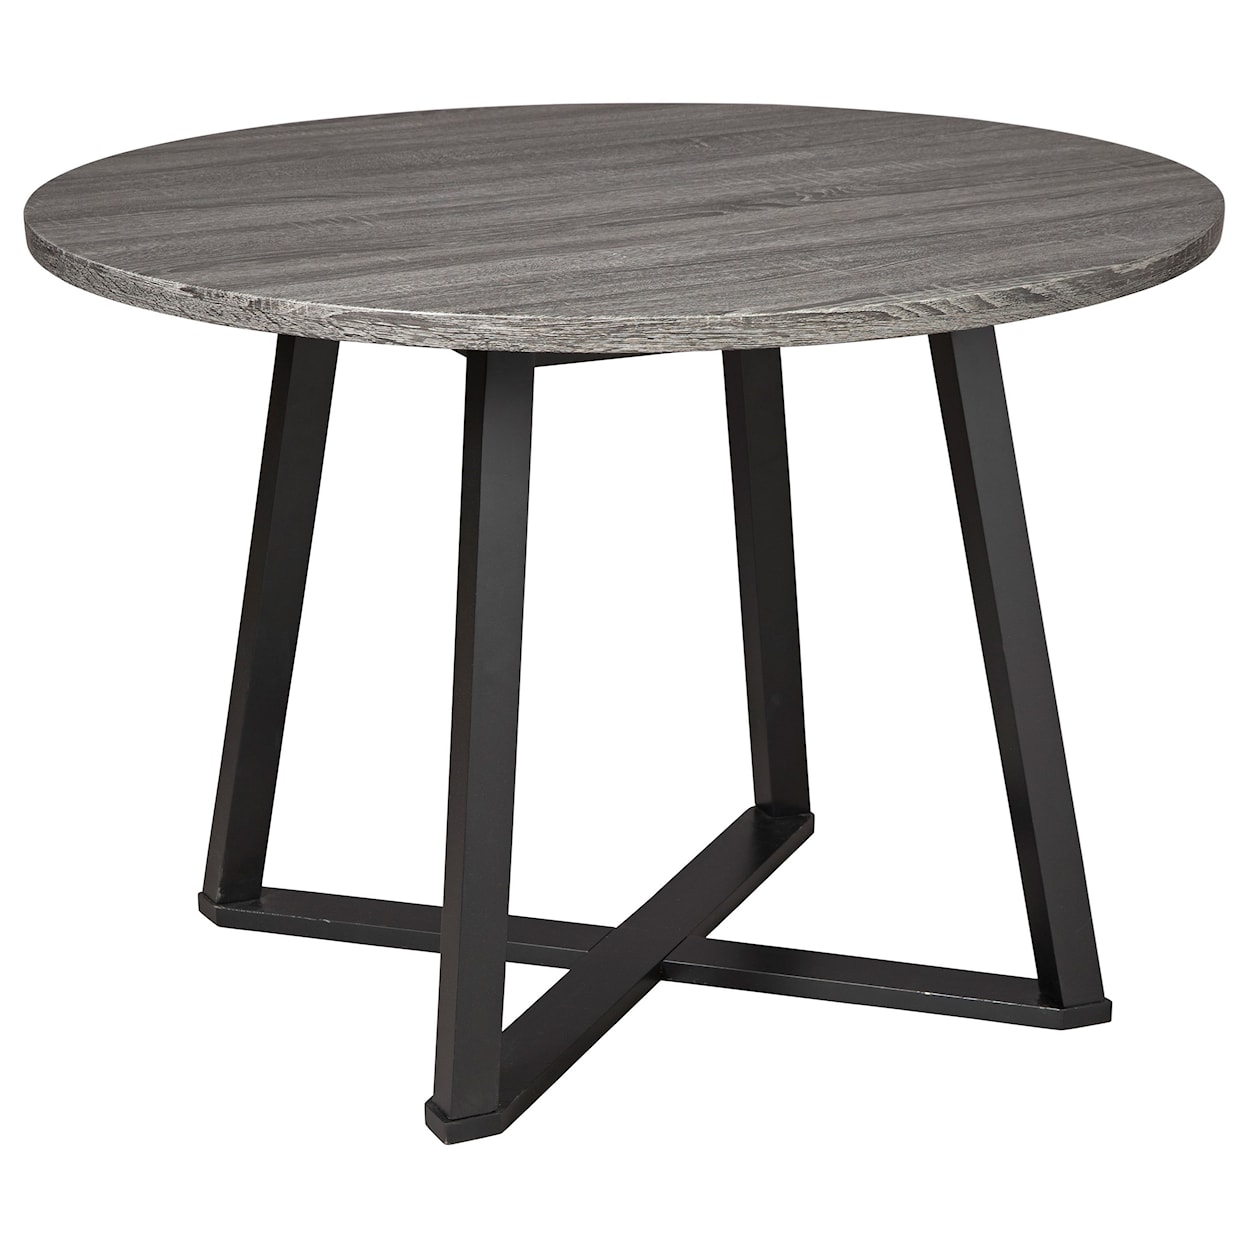 Signature Design by Ashley Furniture Centiar Round Dining Room Table